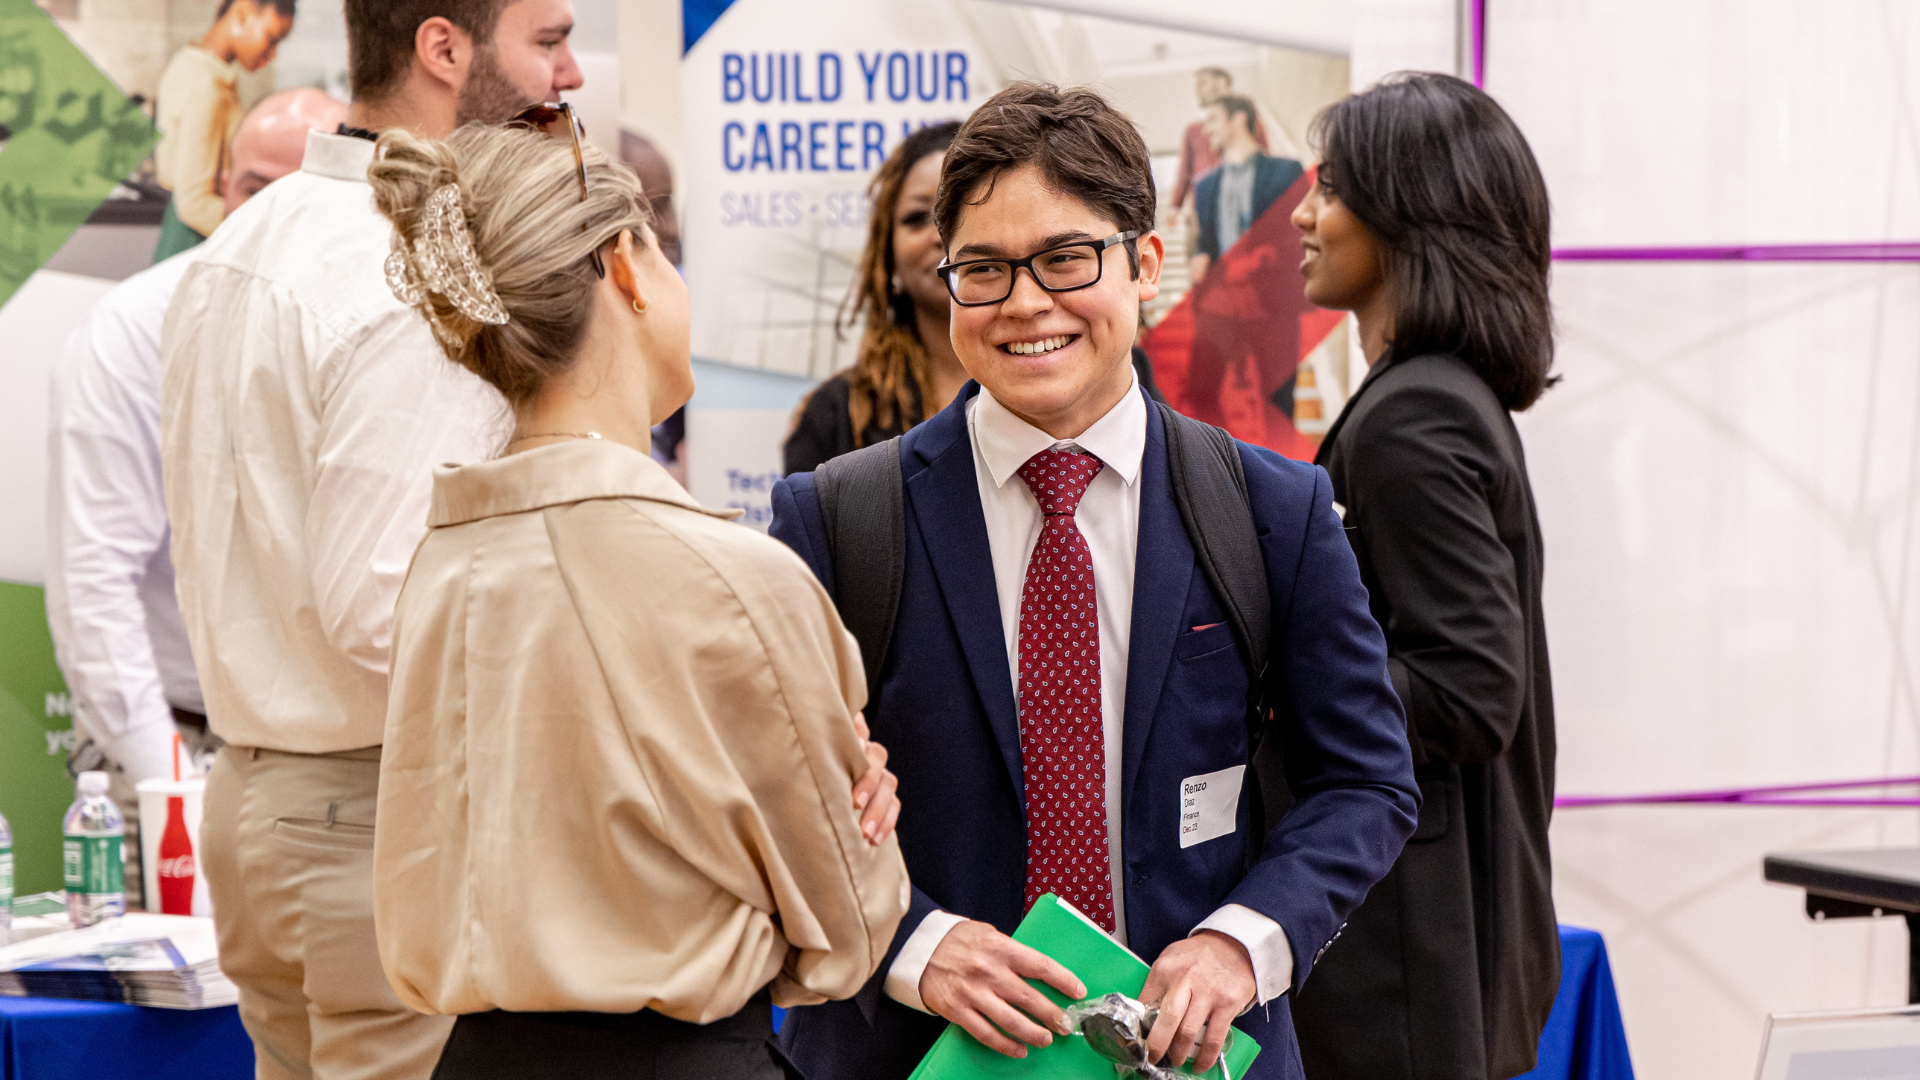 Student smiling while wearing a blue blazer at a job fair